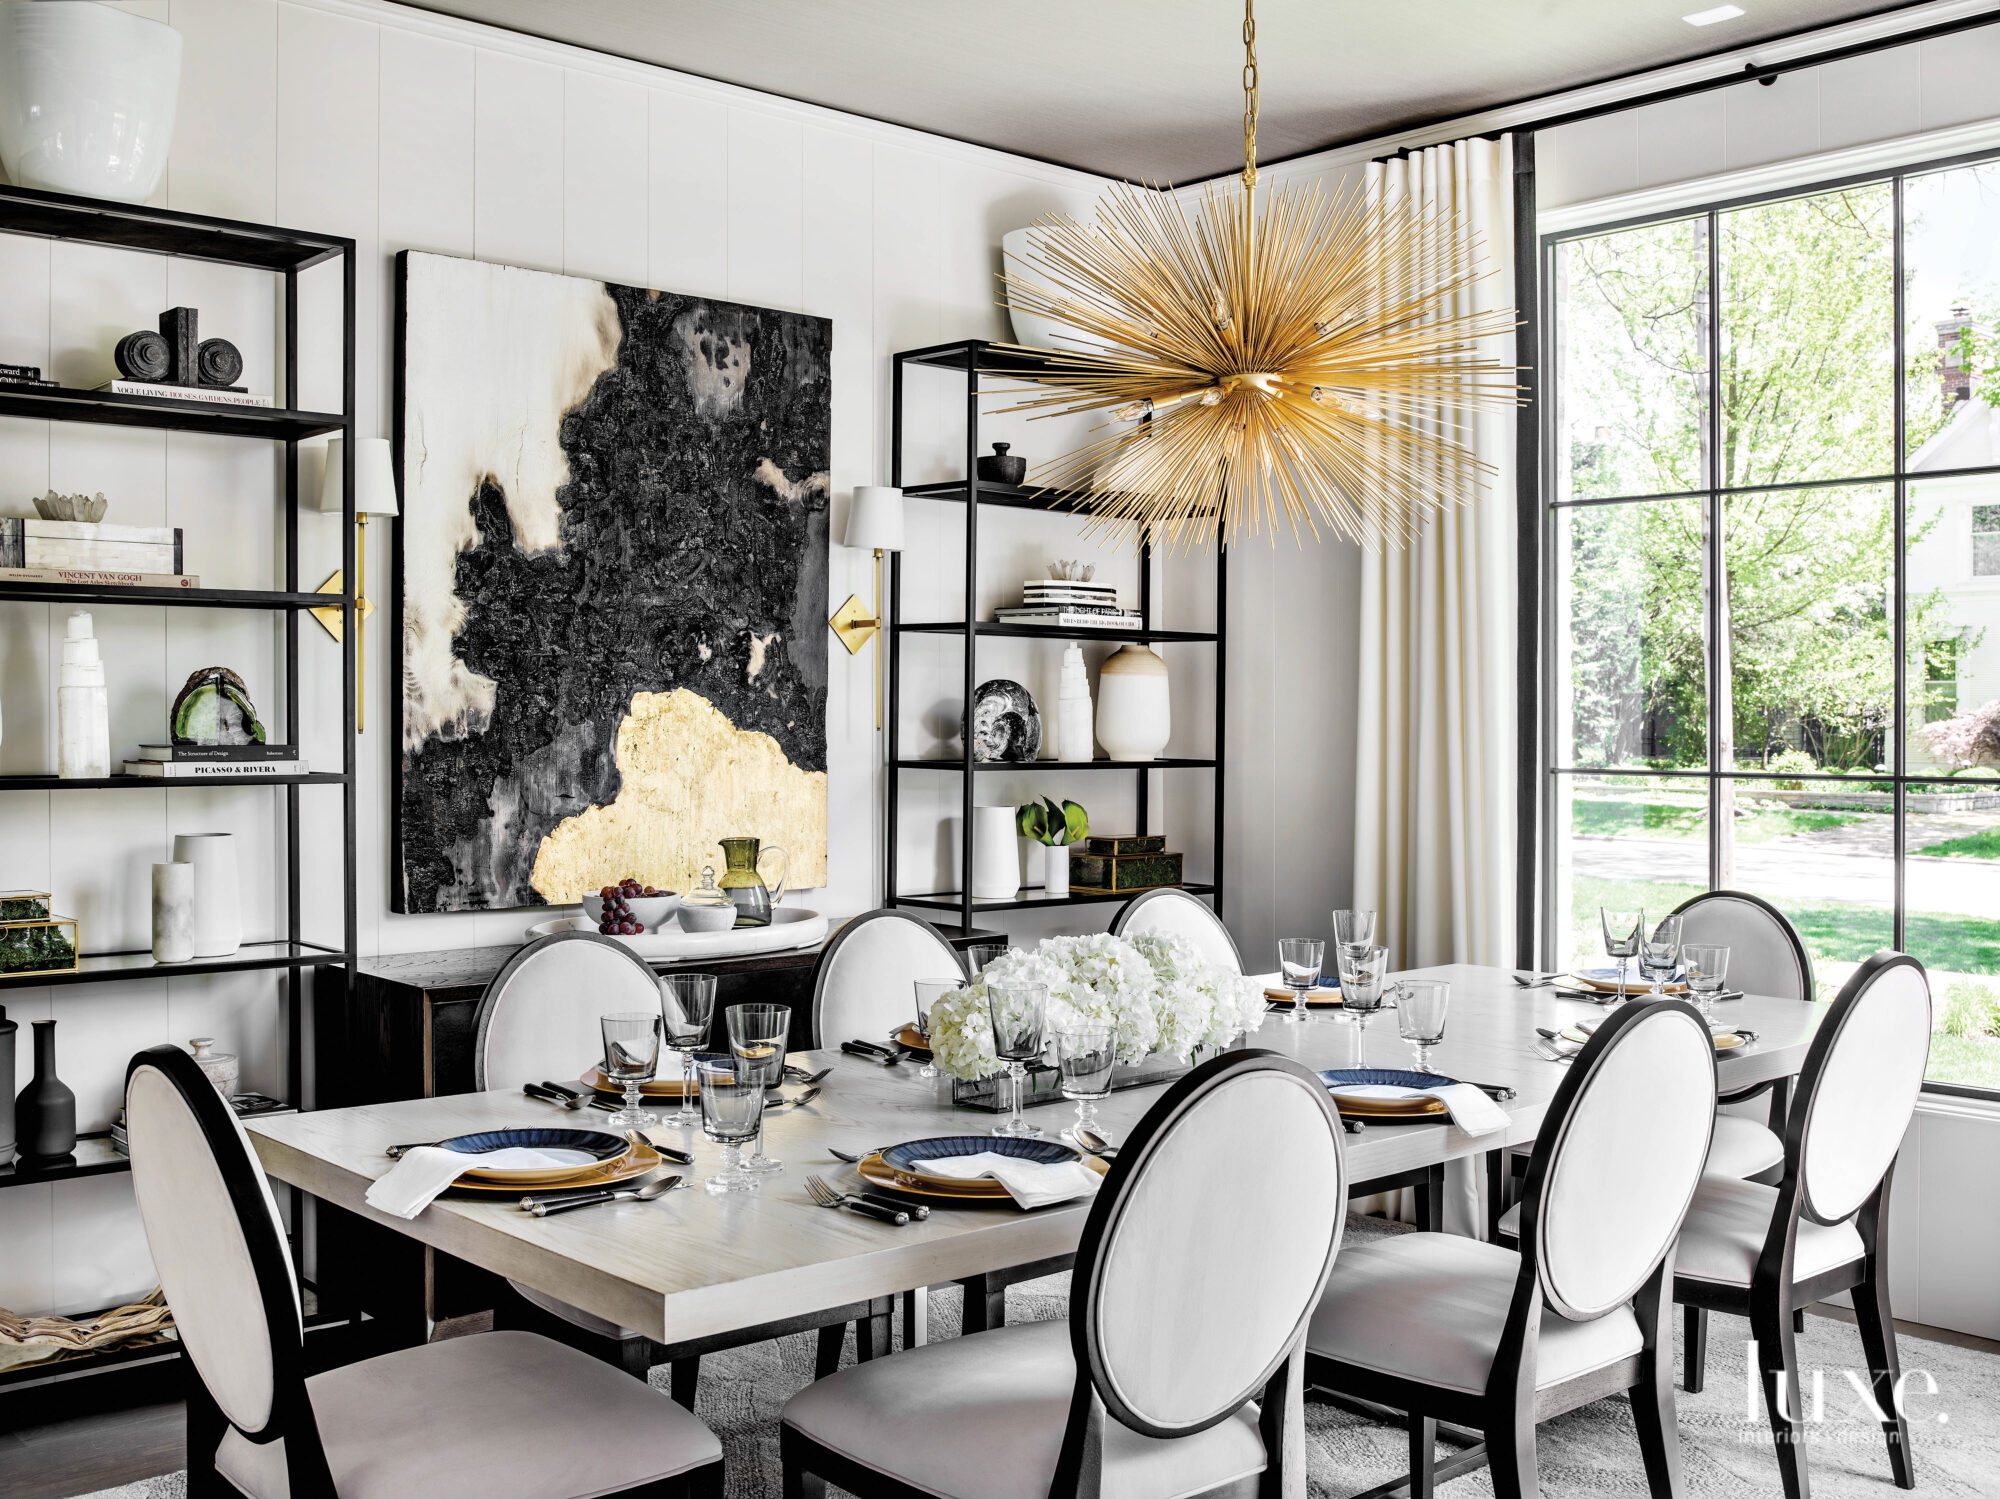 The dining room is decorated in black, white and gold, including a dramatic chandelier and a painting featuring gold leaf by Cleveland Dean.